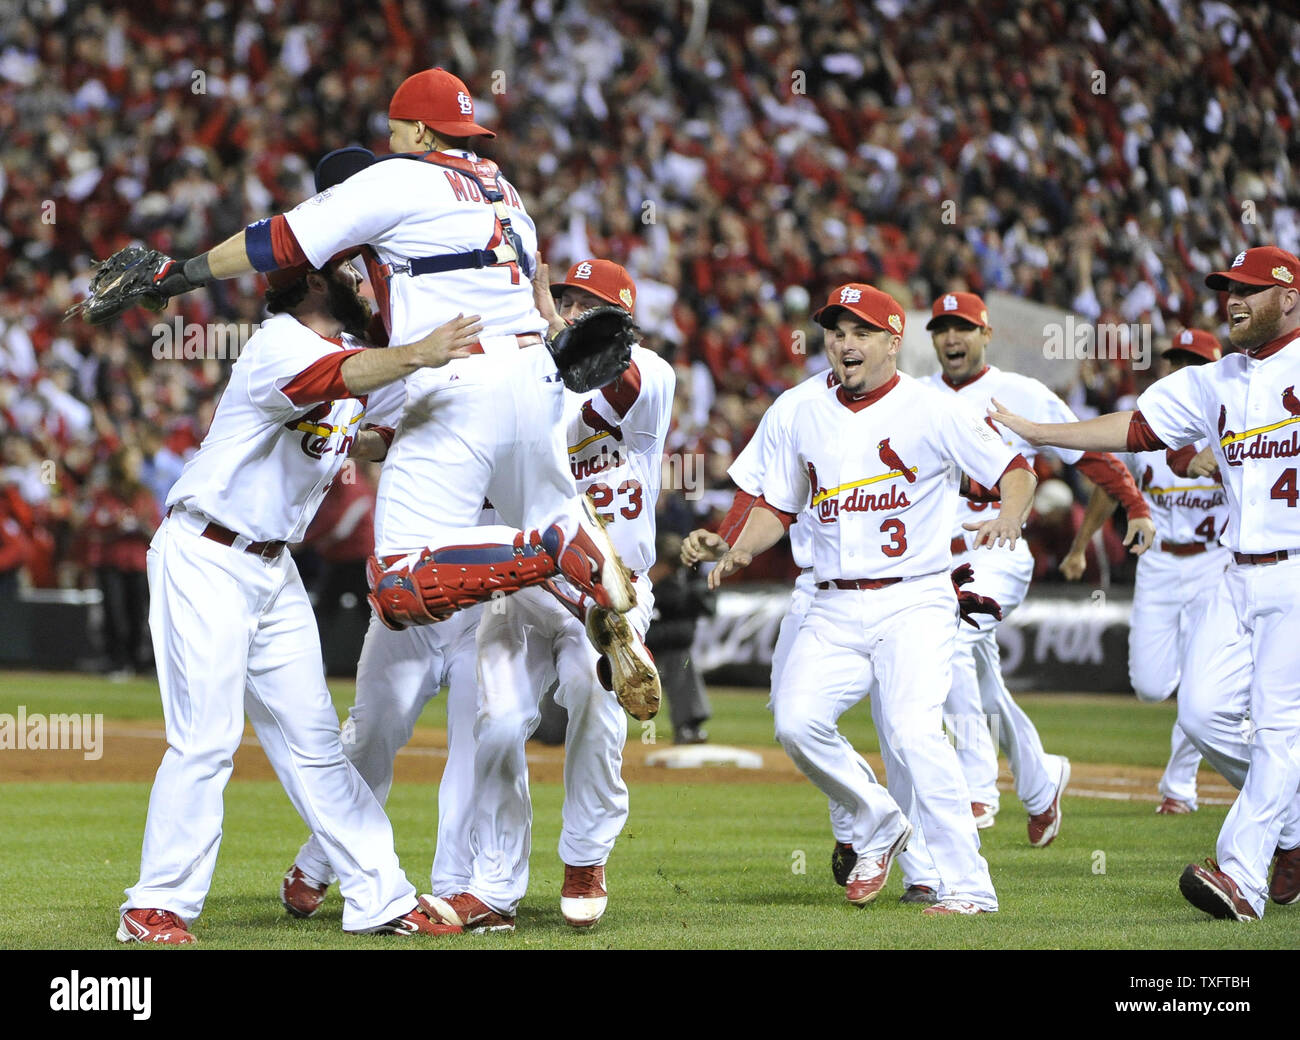 St. Louis Cardinals Jason Motte (L) is jumped on by catcher Yadier Molina  as the Cardinals celebrate winning game 7 of the World Series at Busch  Stadium on October 28, 2011 in